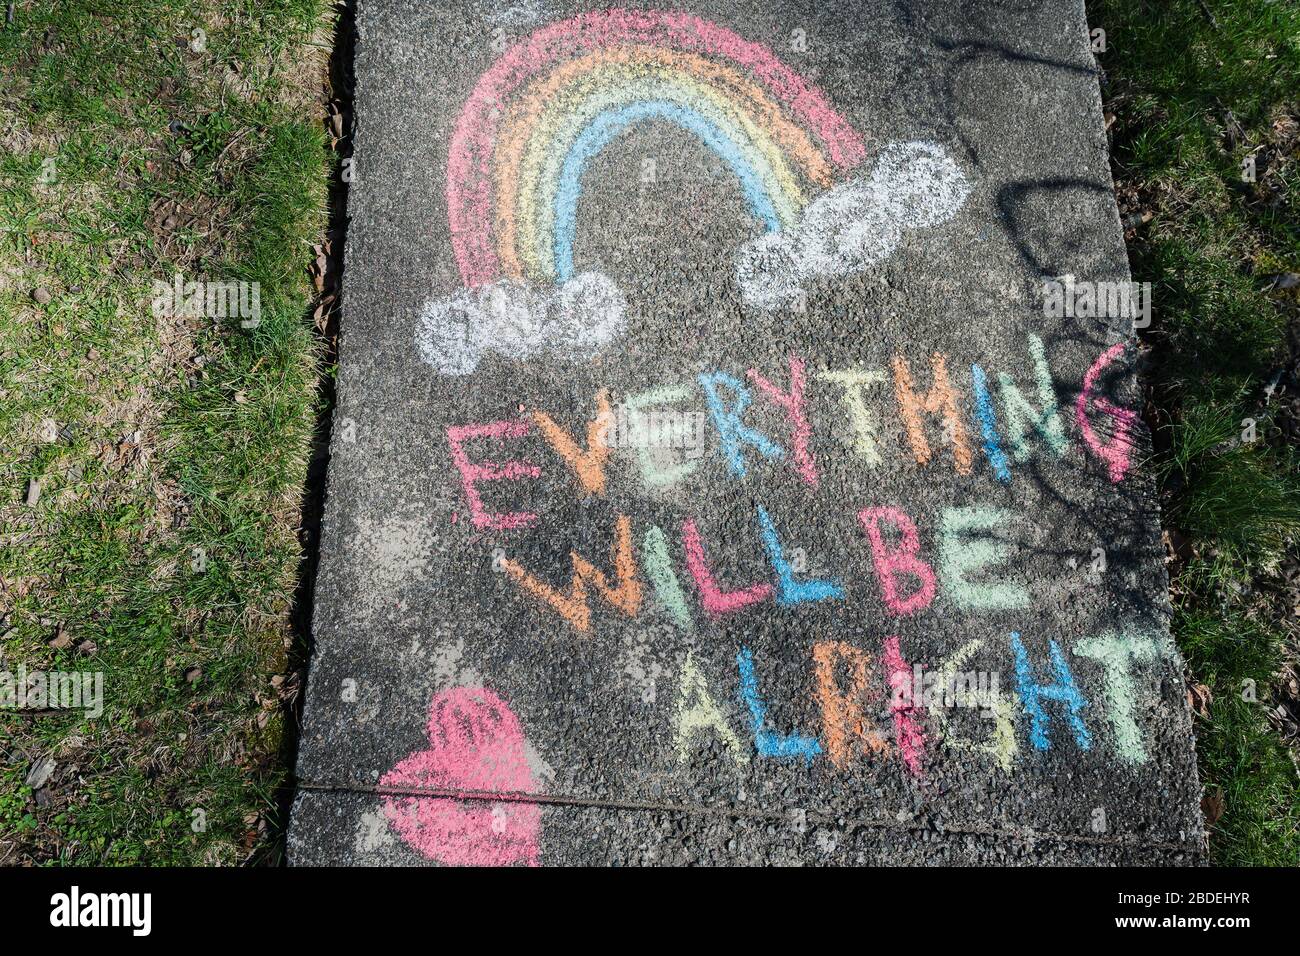 Hopeful message written on sidewalk in chalk during Covid 19 pandemic Stock Photo